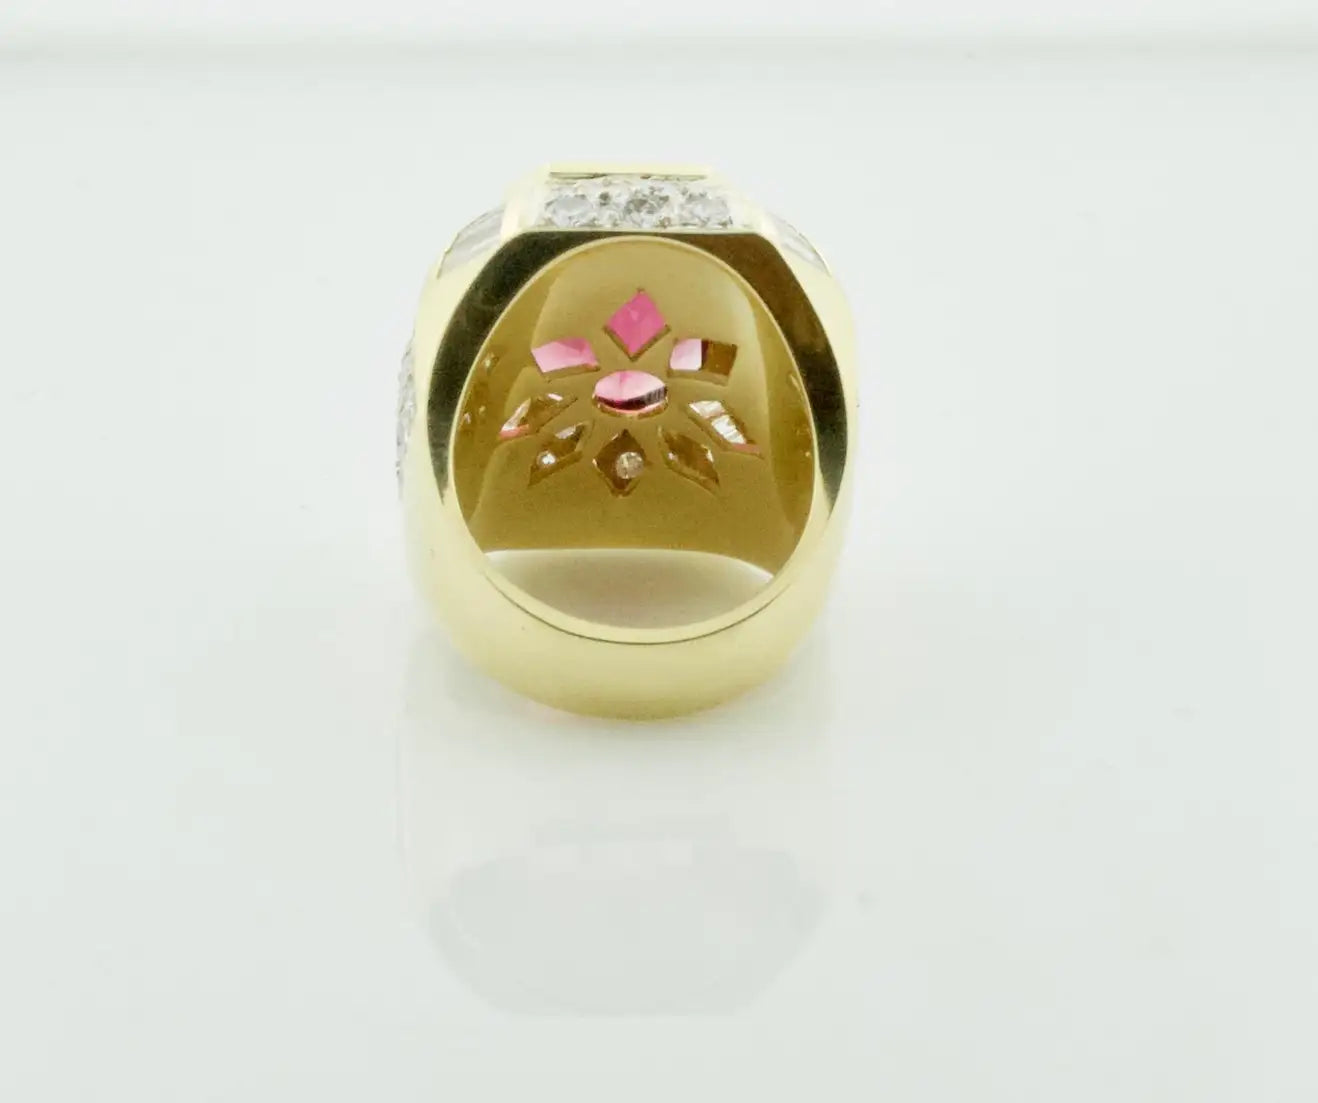 Huge Diamond and Pink Tourmaline Ring in 18k